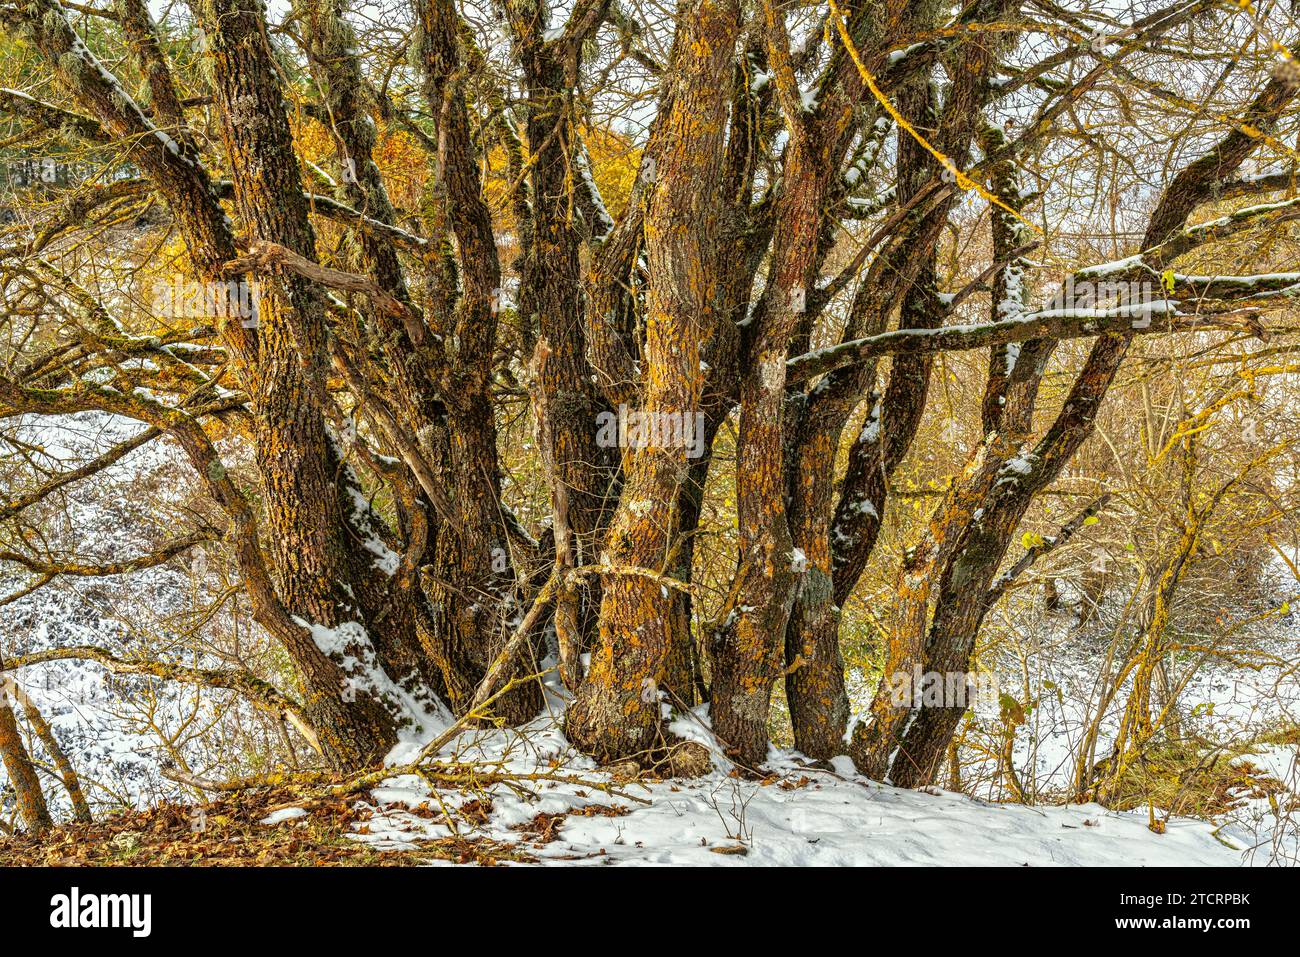 Stump of small acacia trunks yellowed by lichens and covered in snow. Abruzzo, Italy, Europe Stock Photo